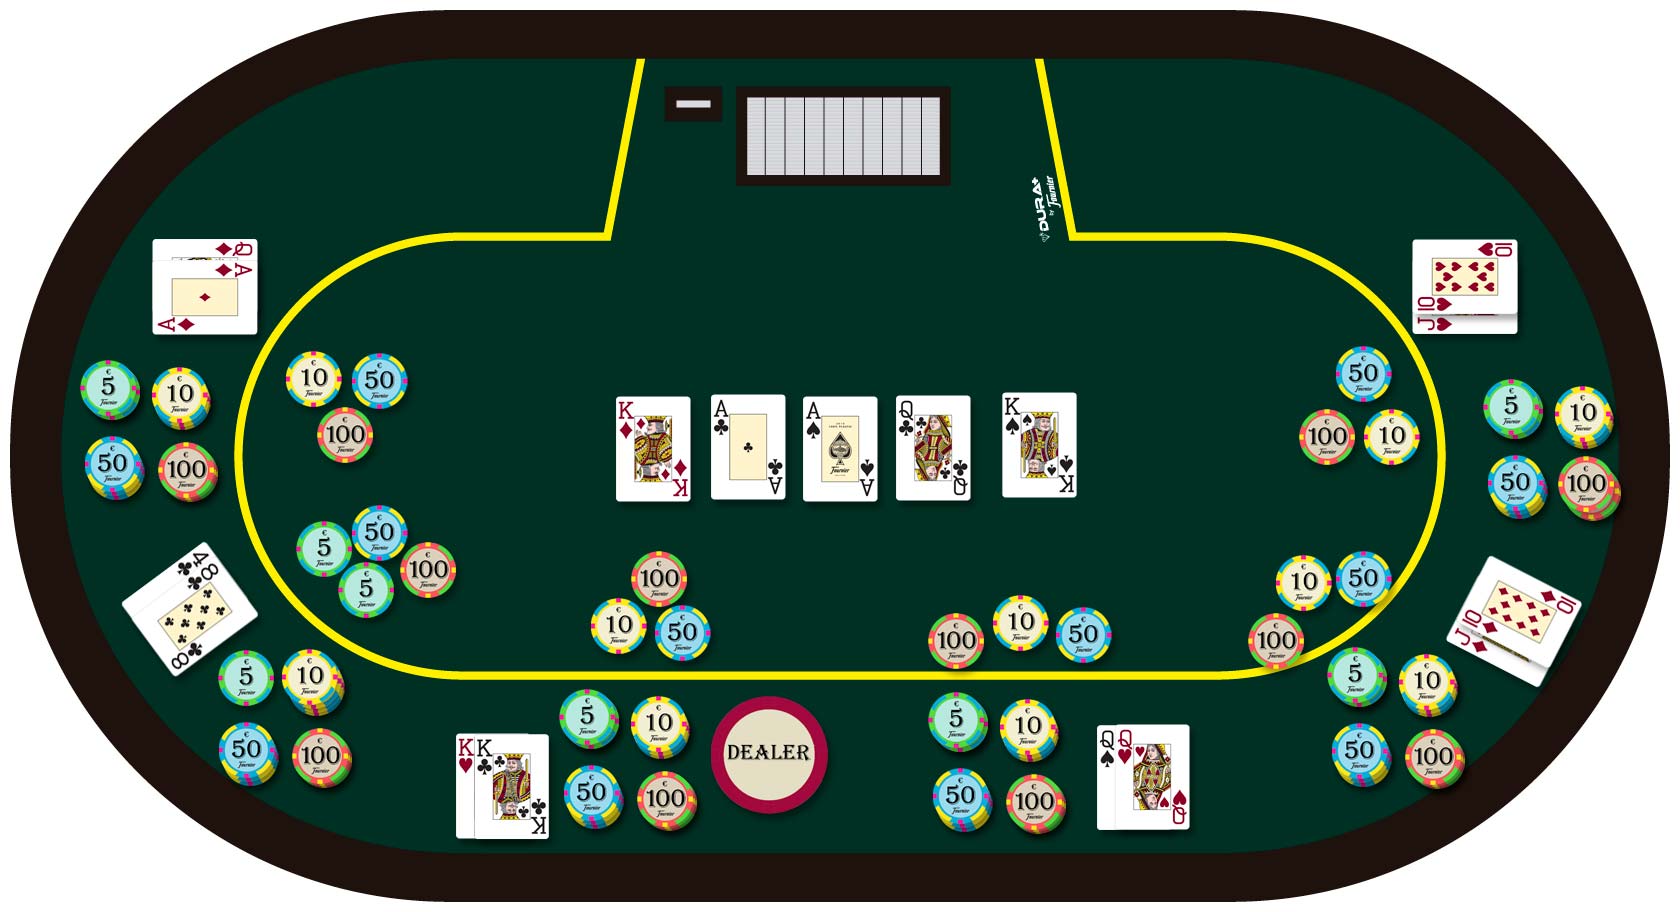 How to play Texas Hold'em: card game instructions